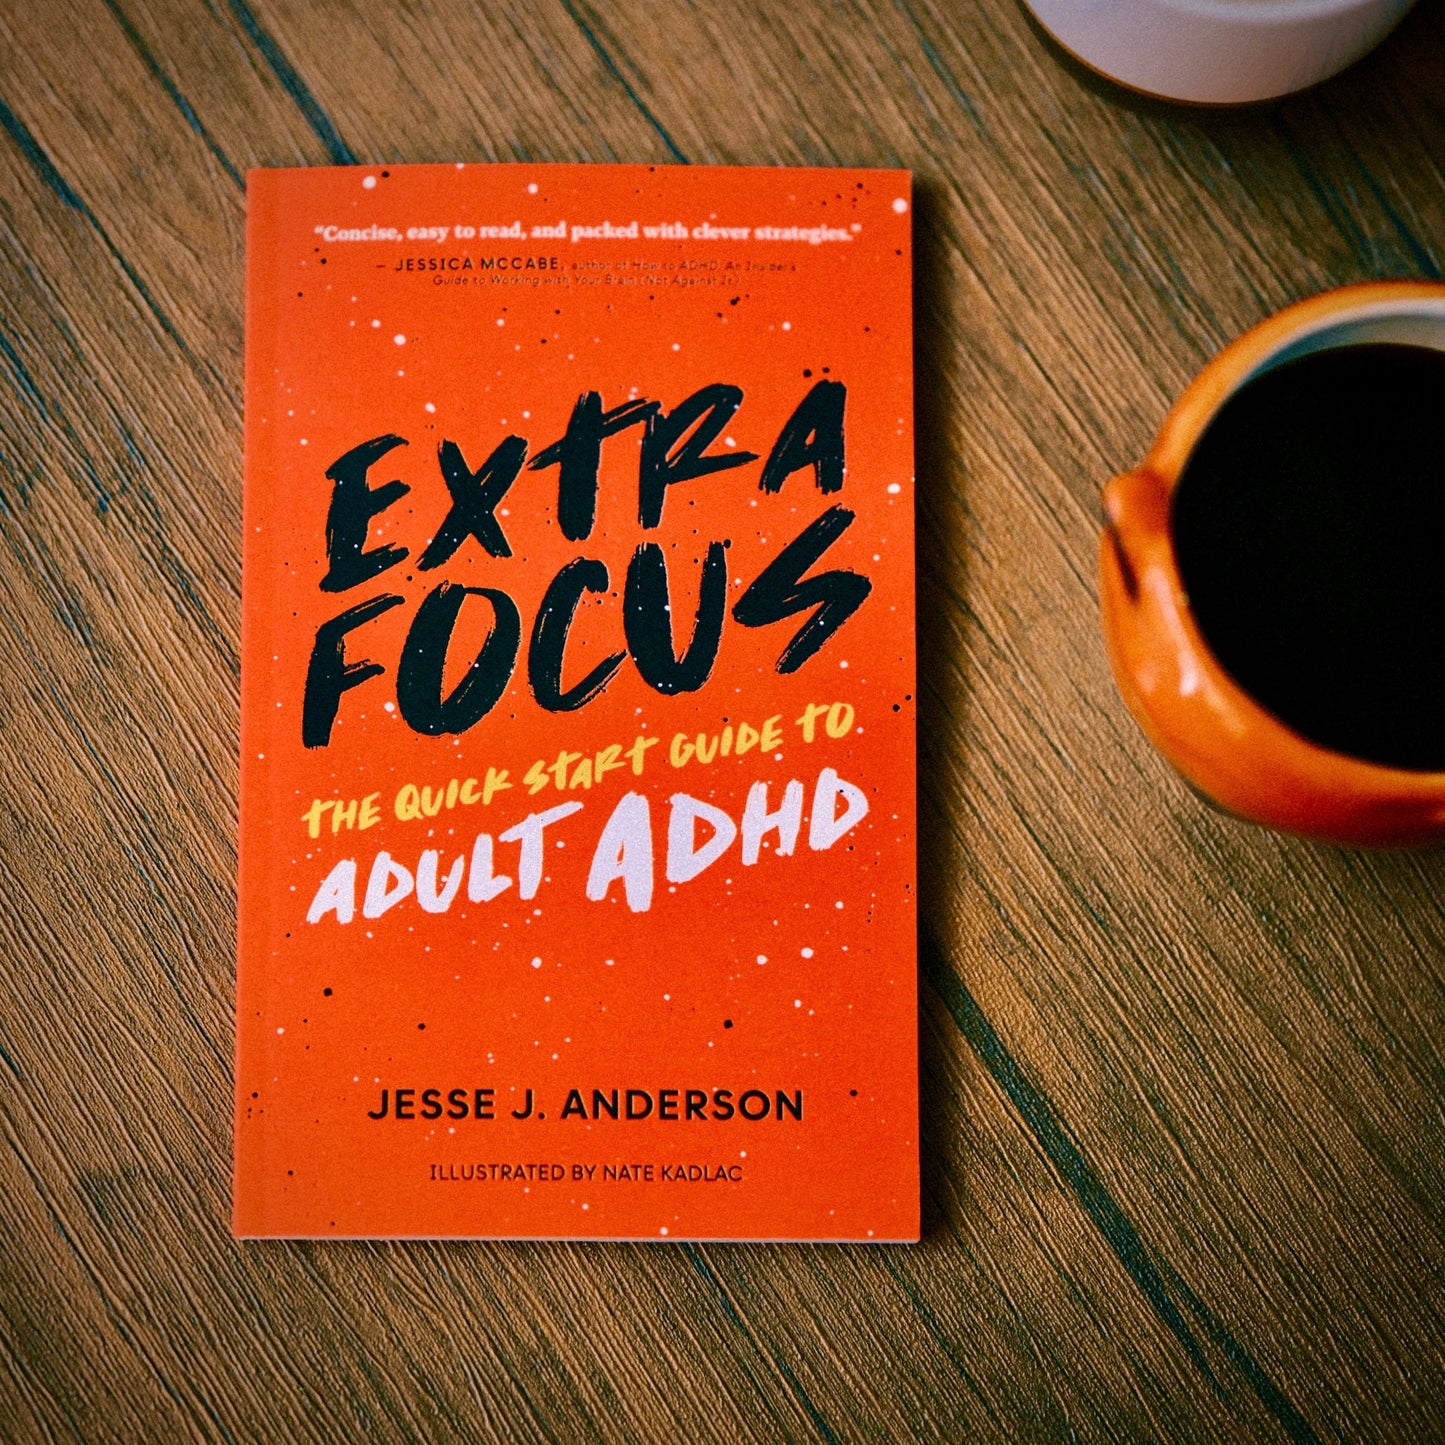 Extra Focus: The Quick Start Guide to Adult ADHD (Paperback)